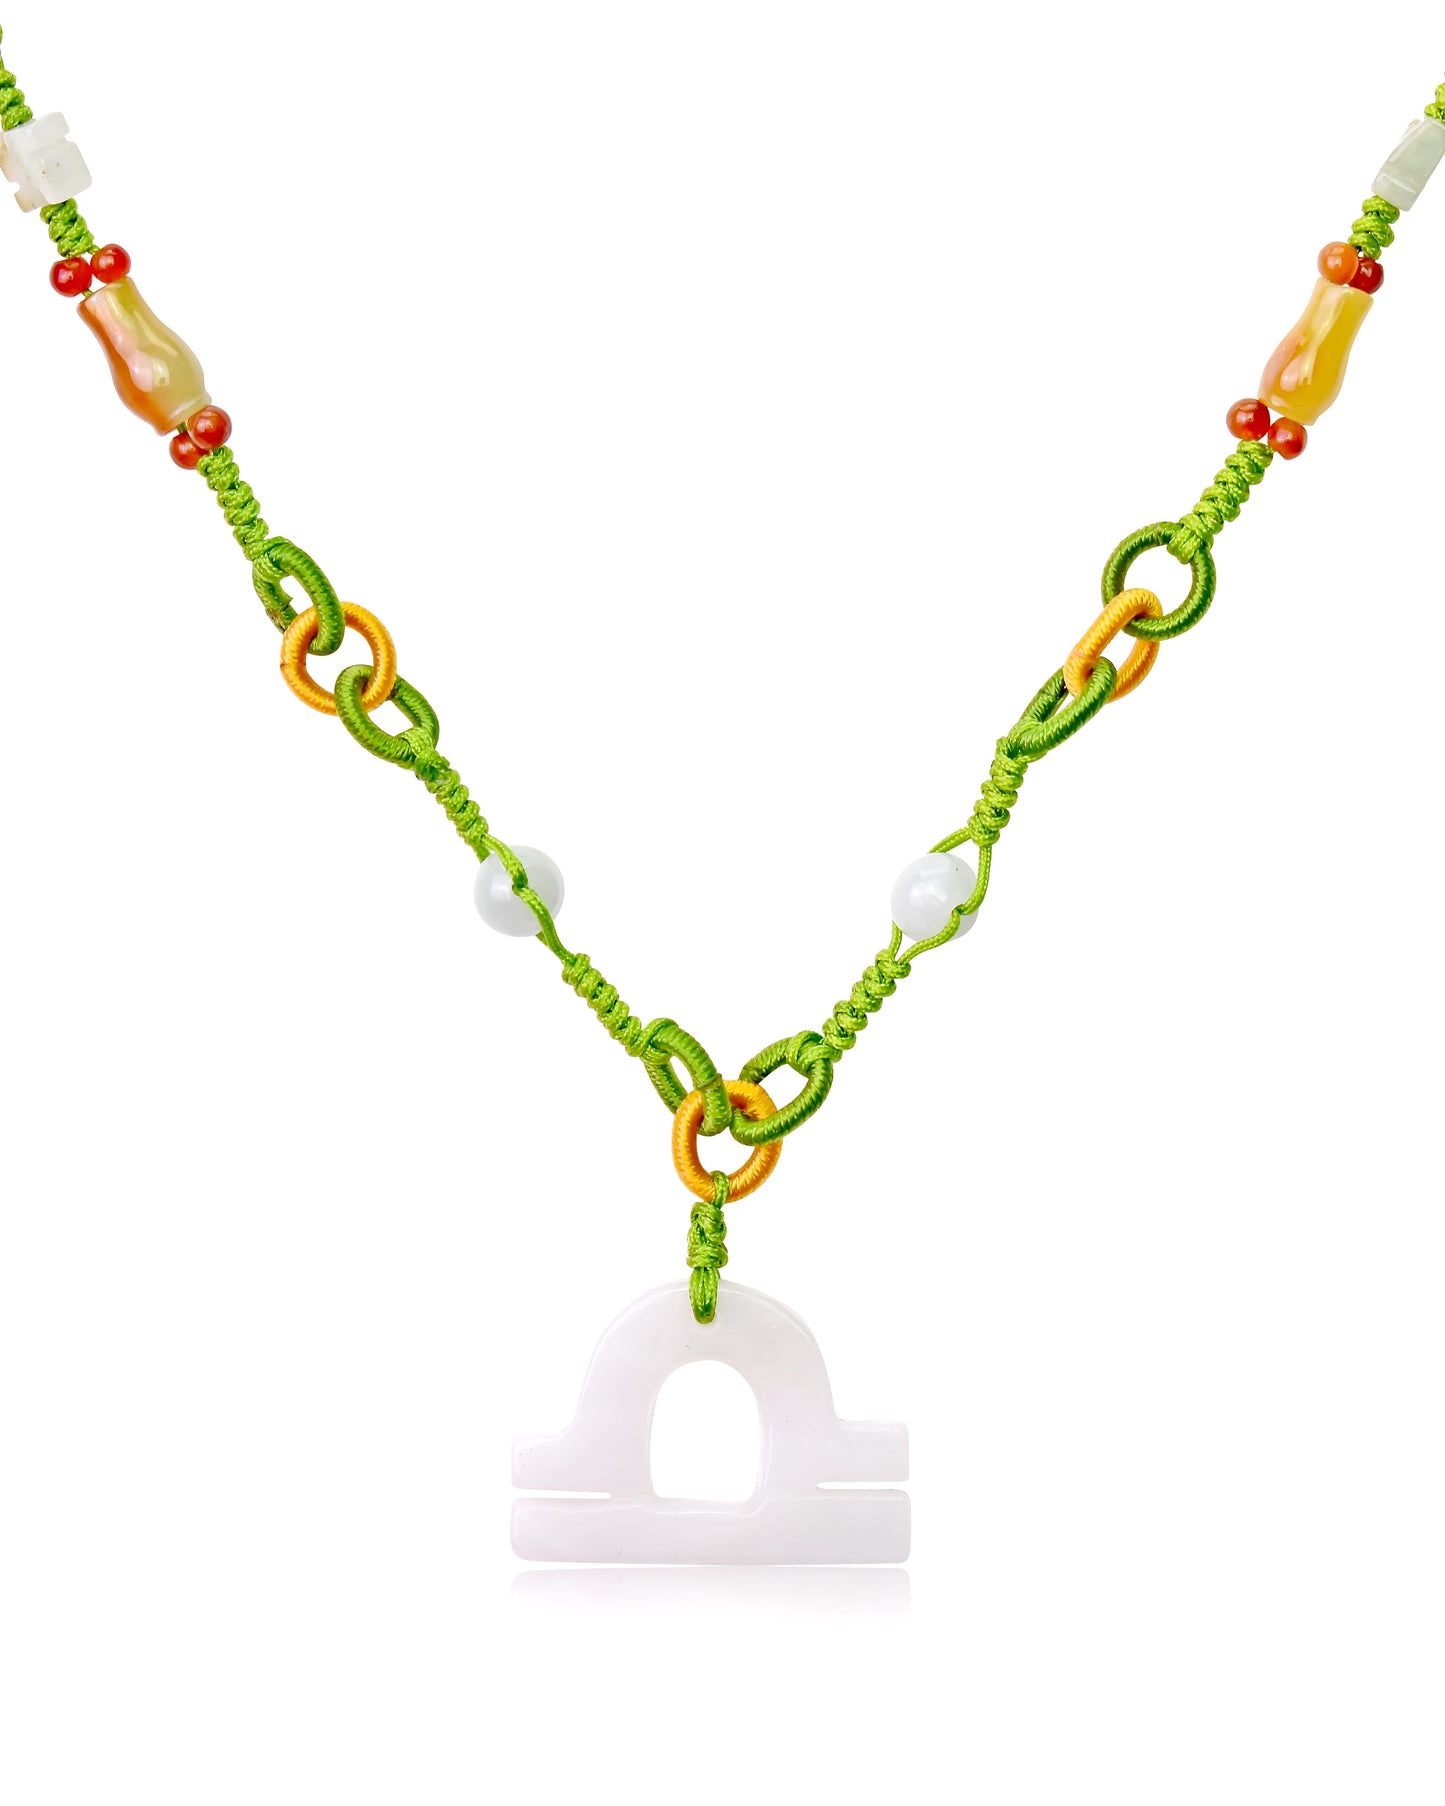 Get the Perfect Get the Perfect Gift for the Libra in Your Life with Jade Necklace made with Lime Cord